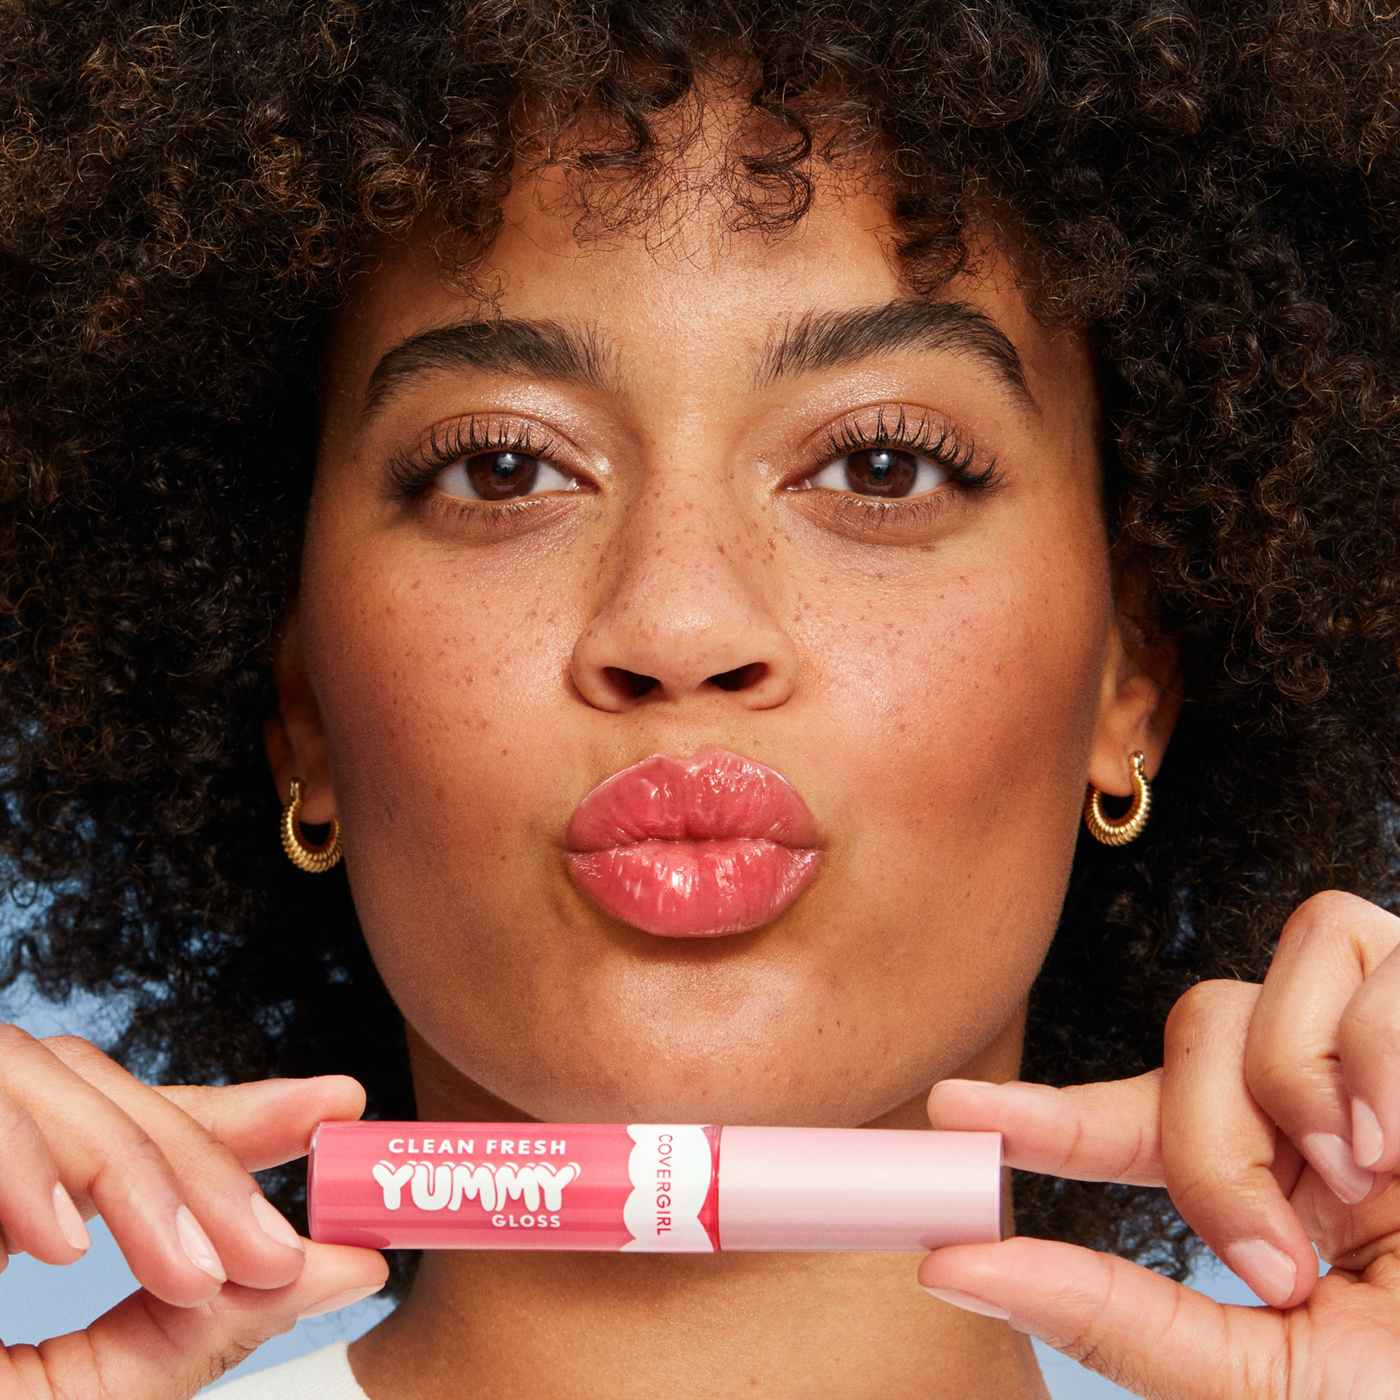 Covergirl Clean Fresh Yummy Lip Gloss - You're Just Jelly; image 6 of 10